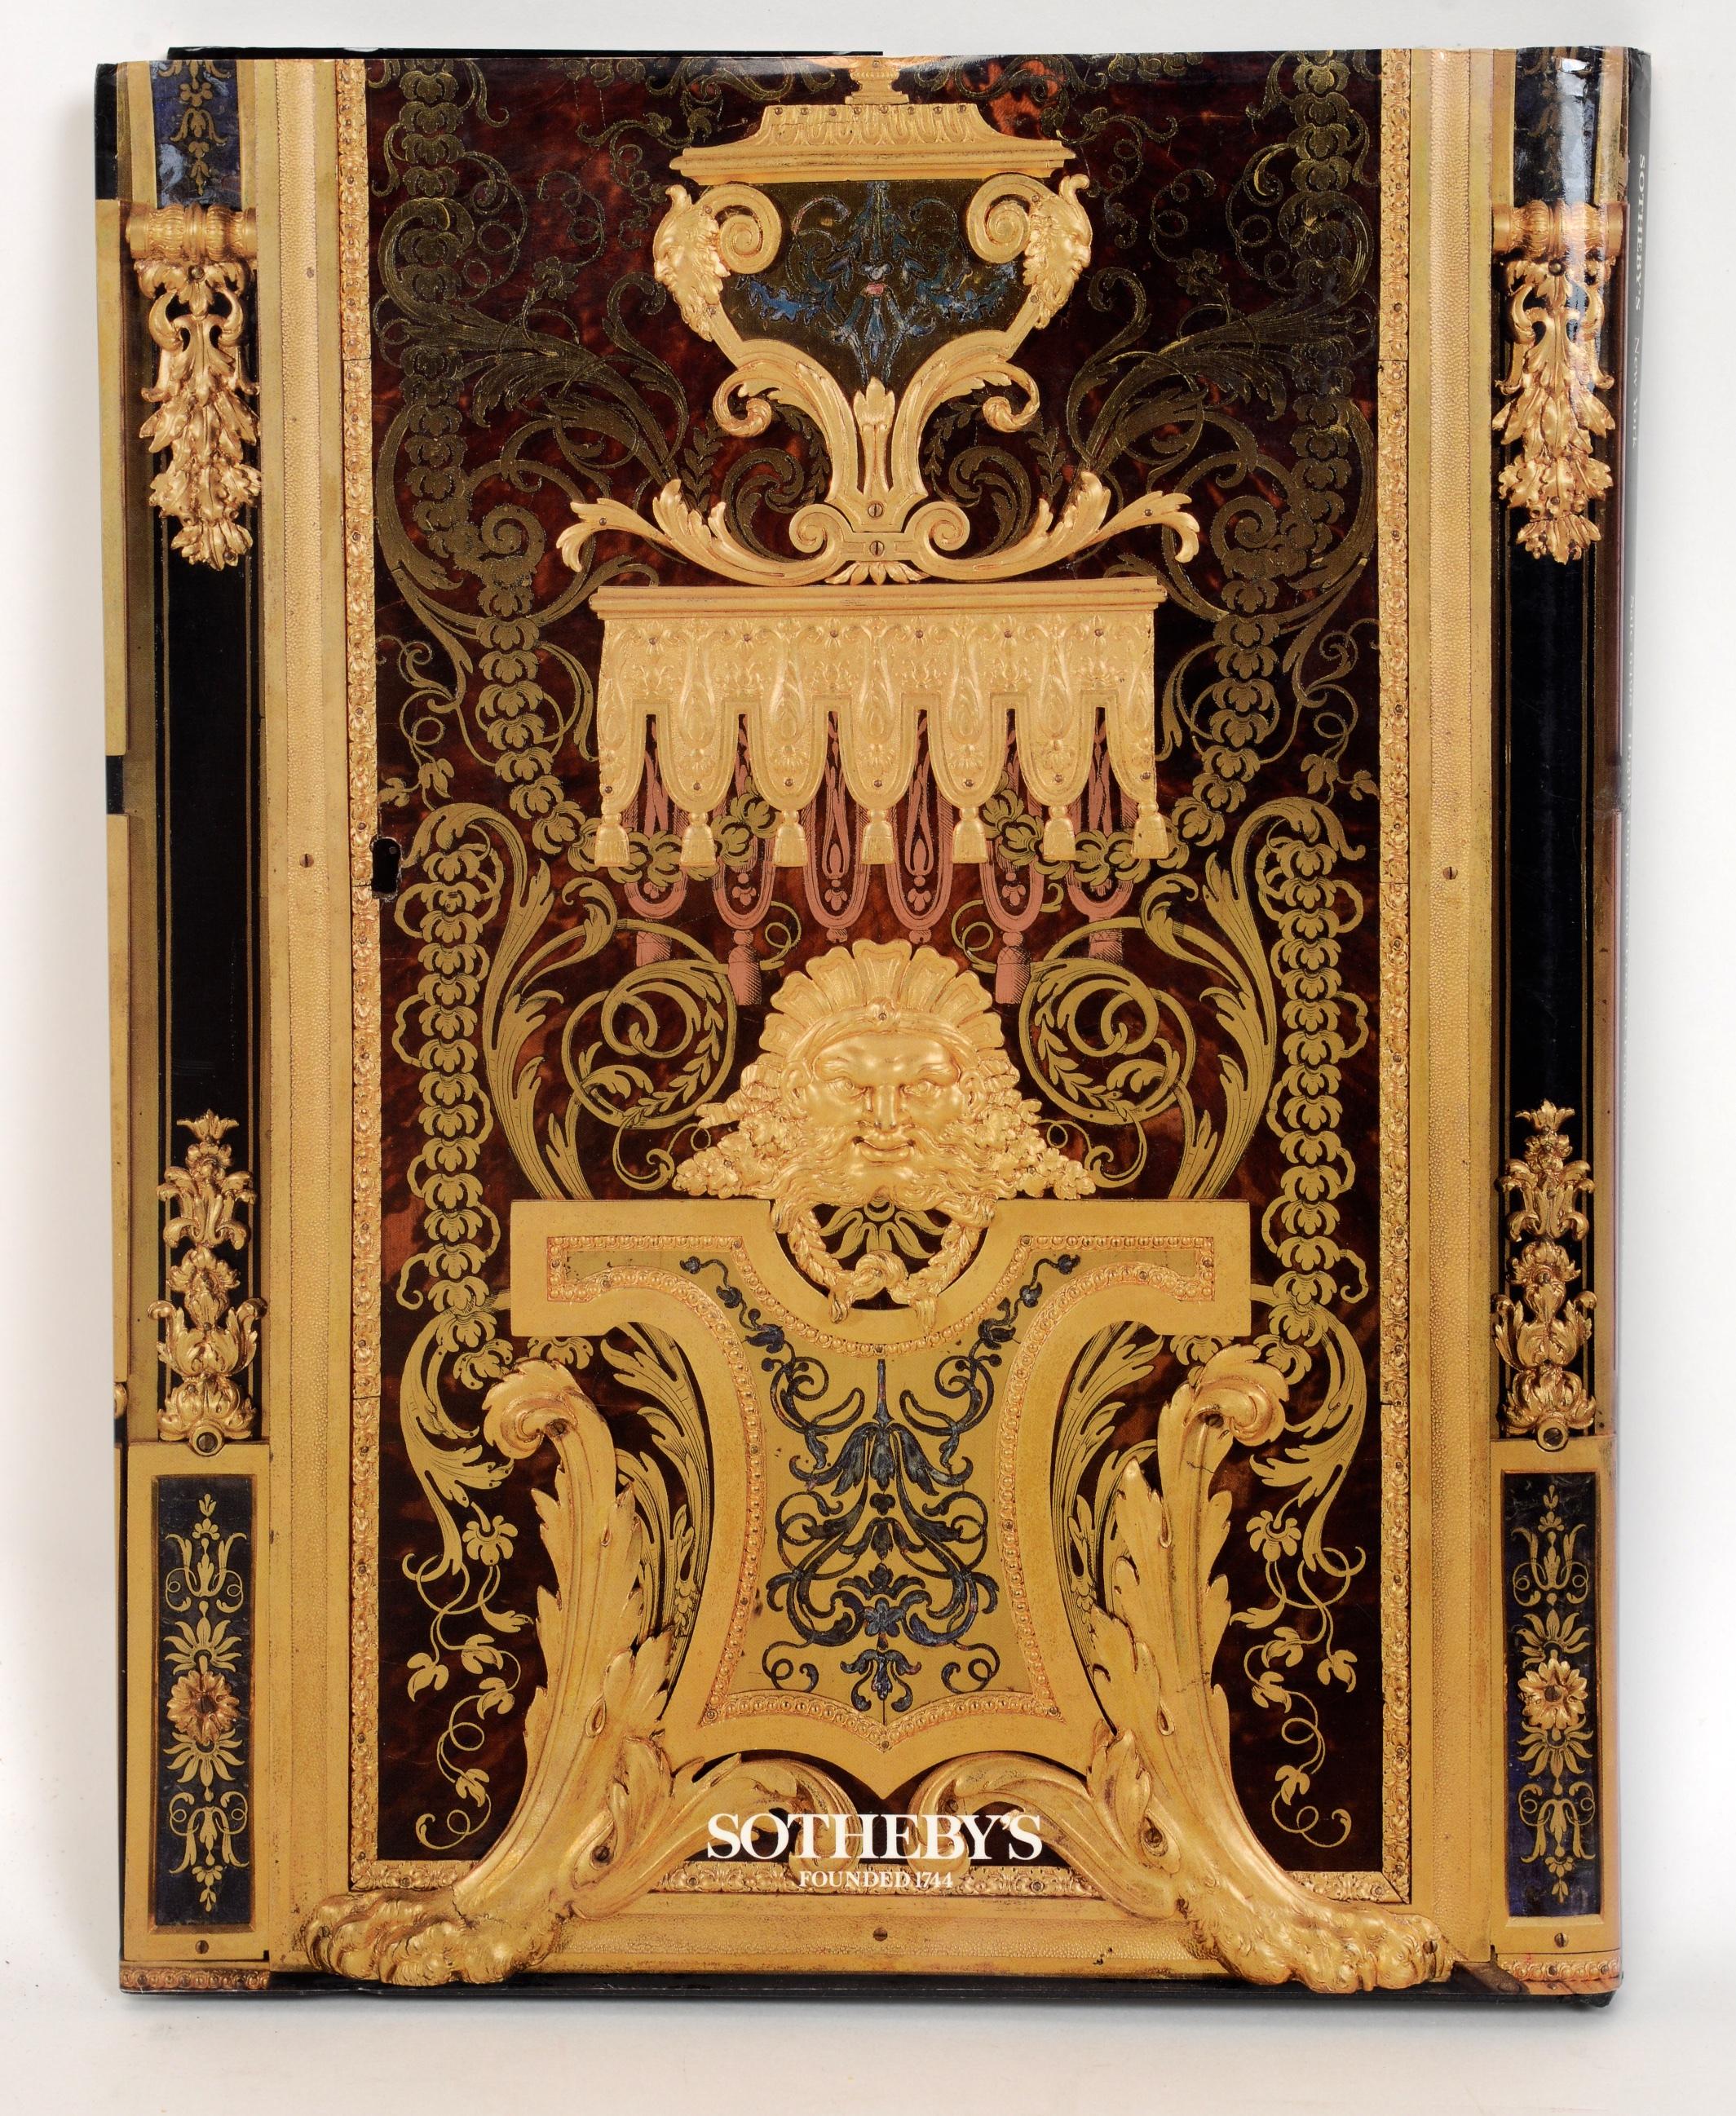 Sotheby's, Highly Important French Furniture from a Private Collection, 1993 For Sale 5